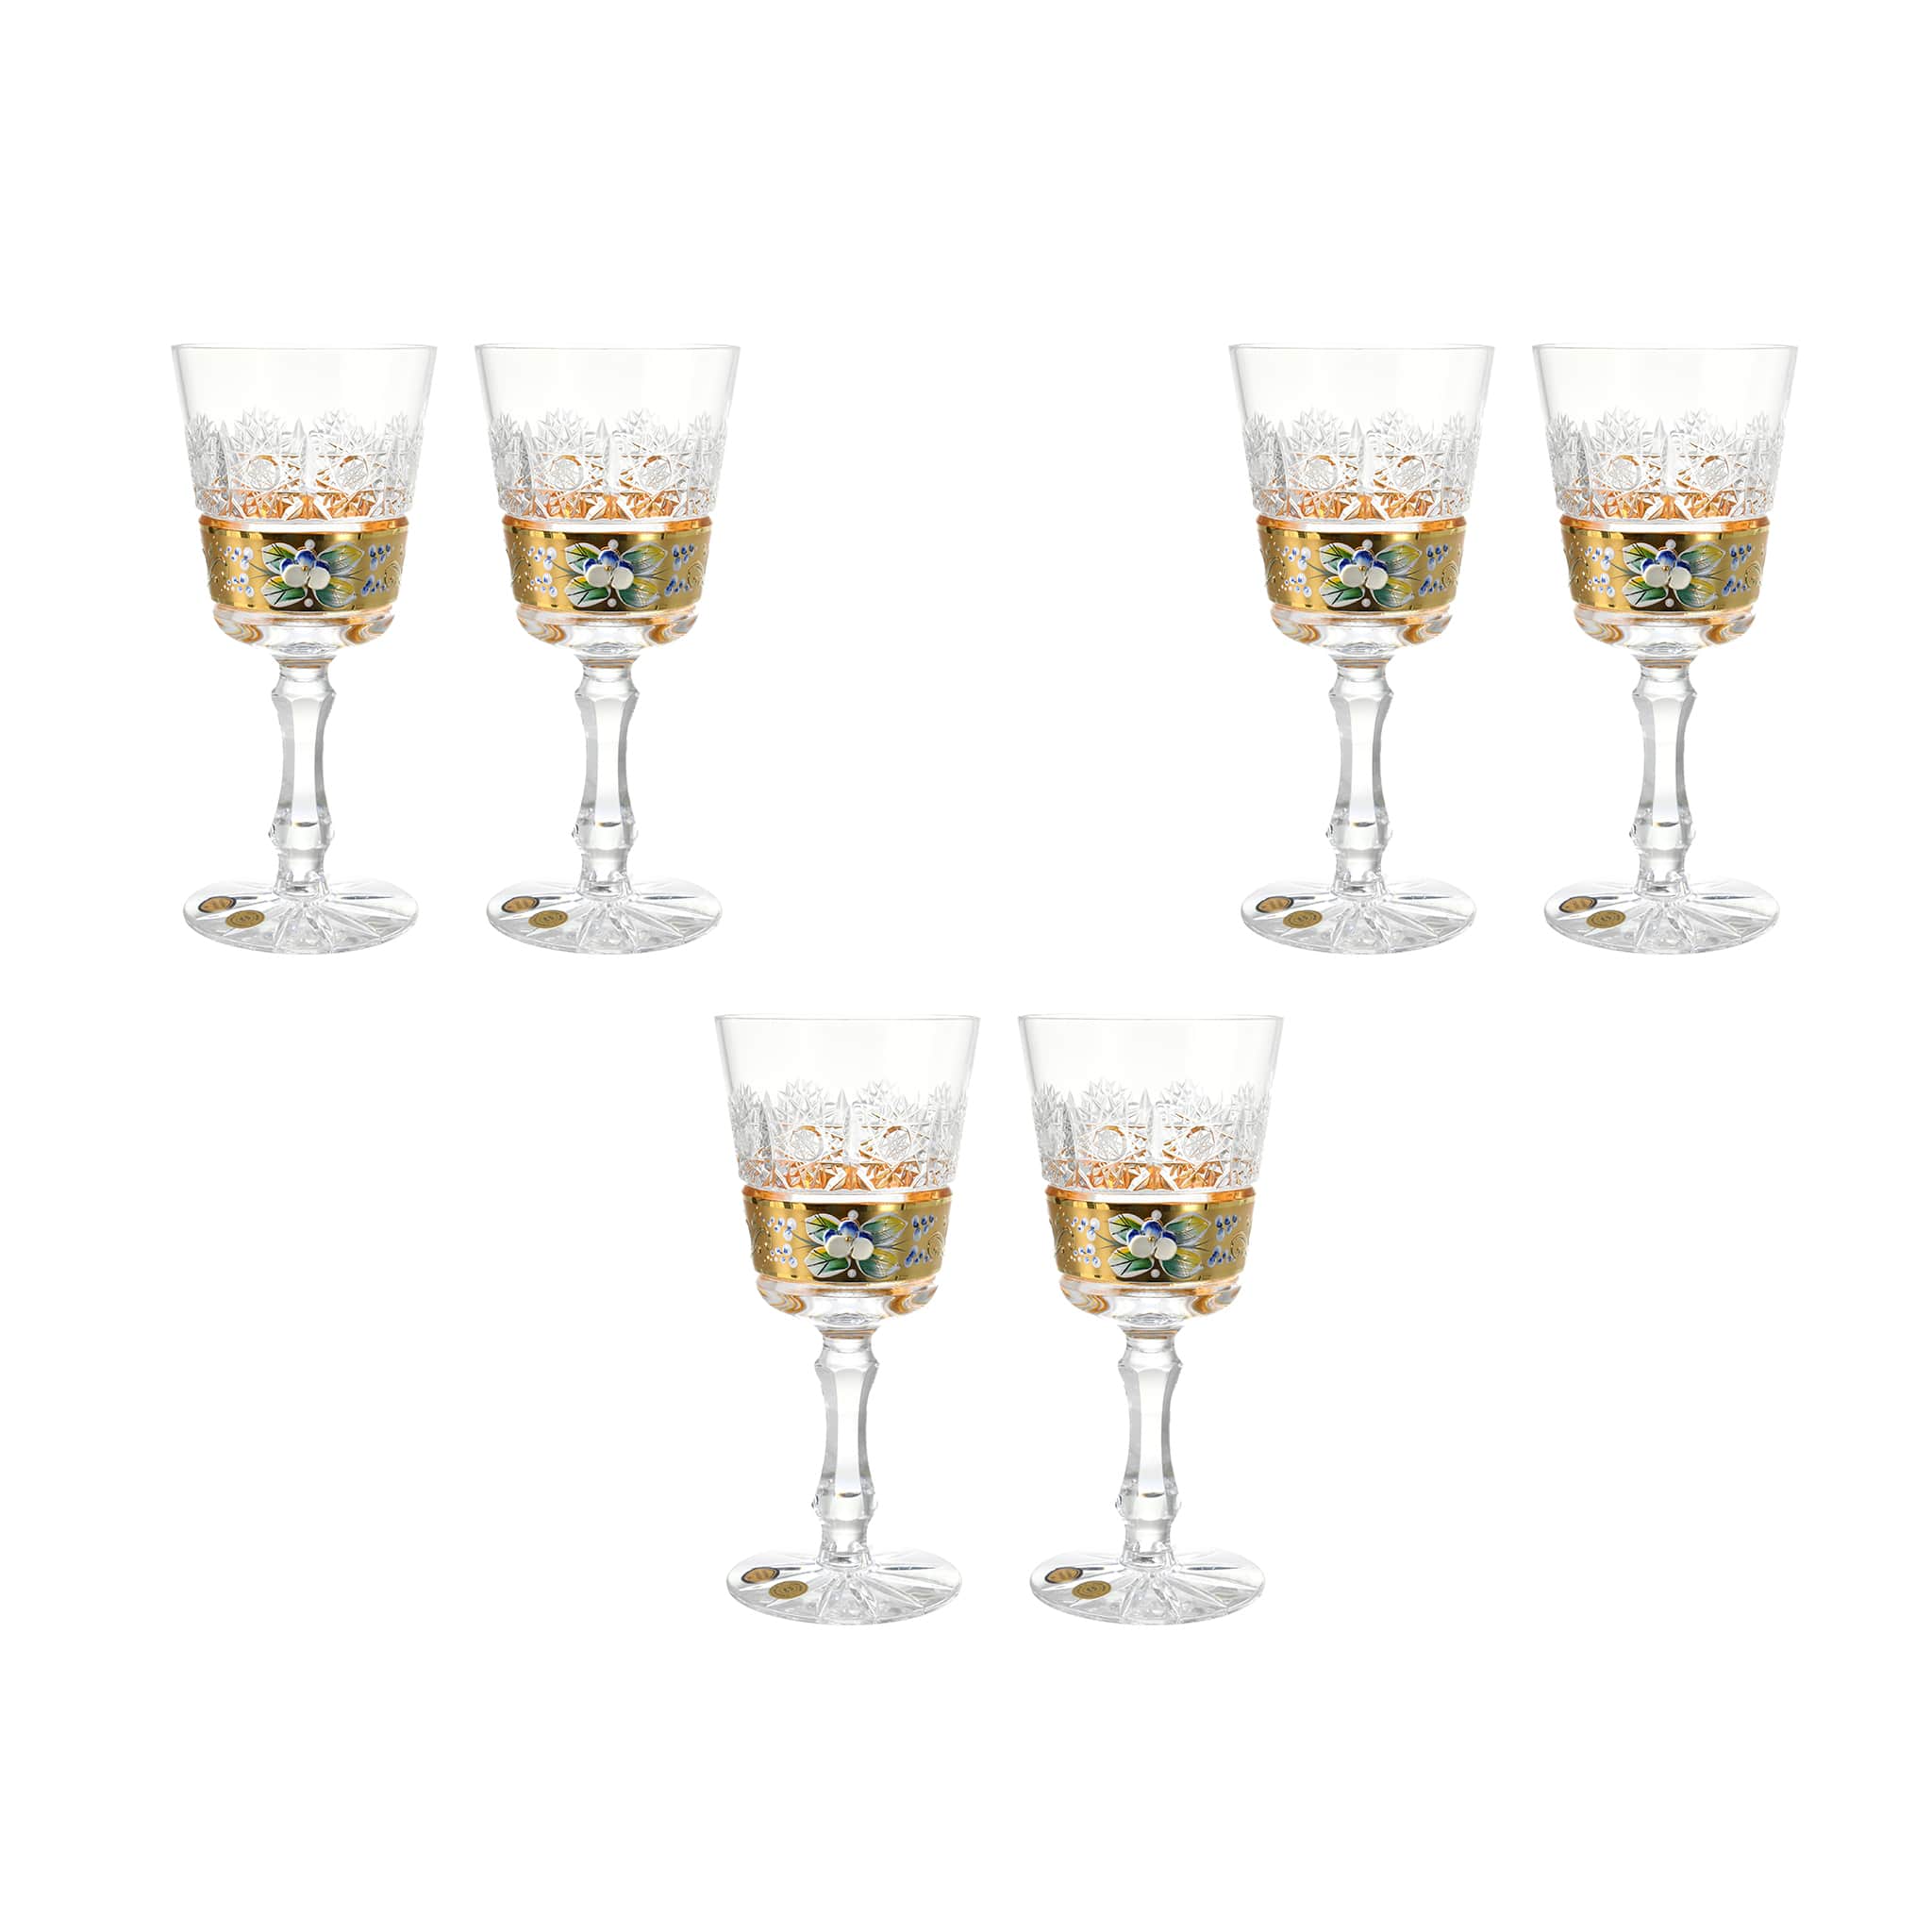 Bohemia Crystal - Goblet Glass Set 6 Pieces - Flower & Gold  - 220ml - 270009215